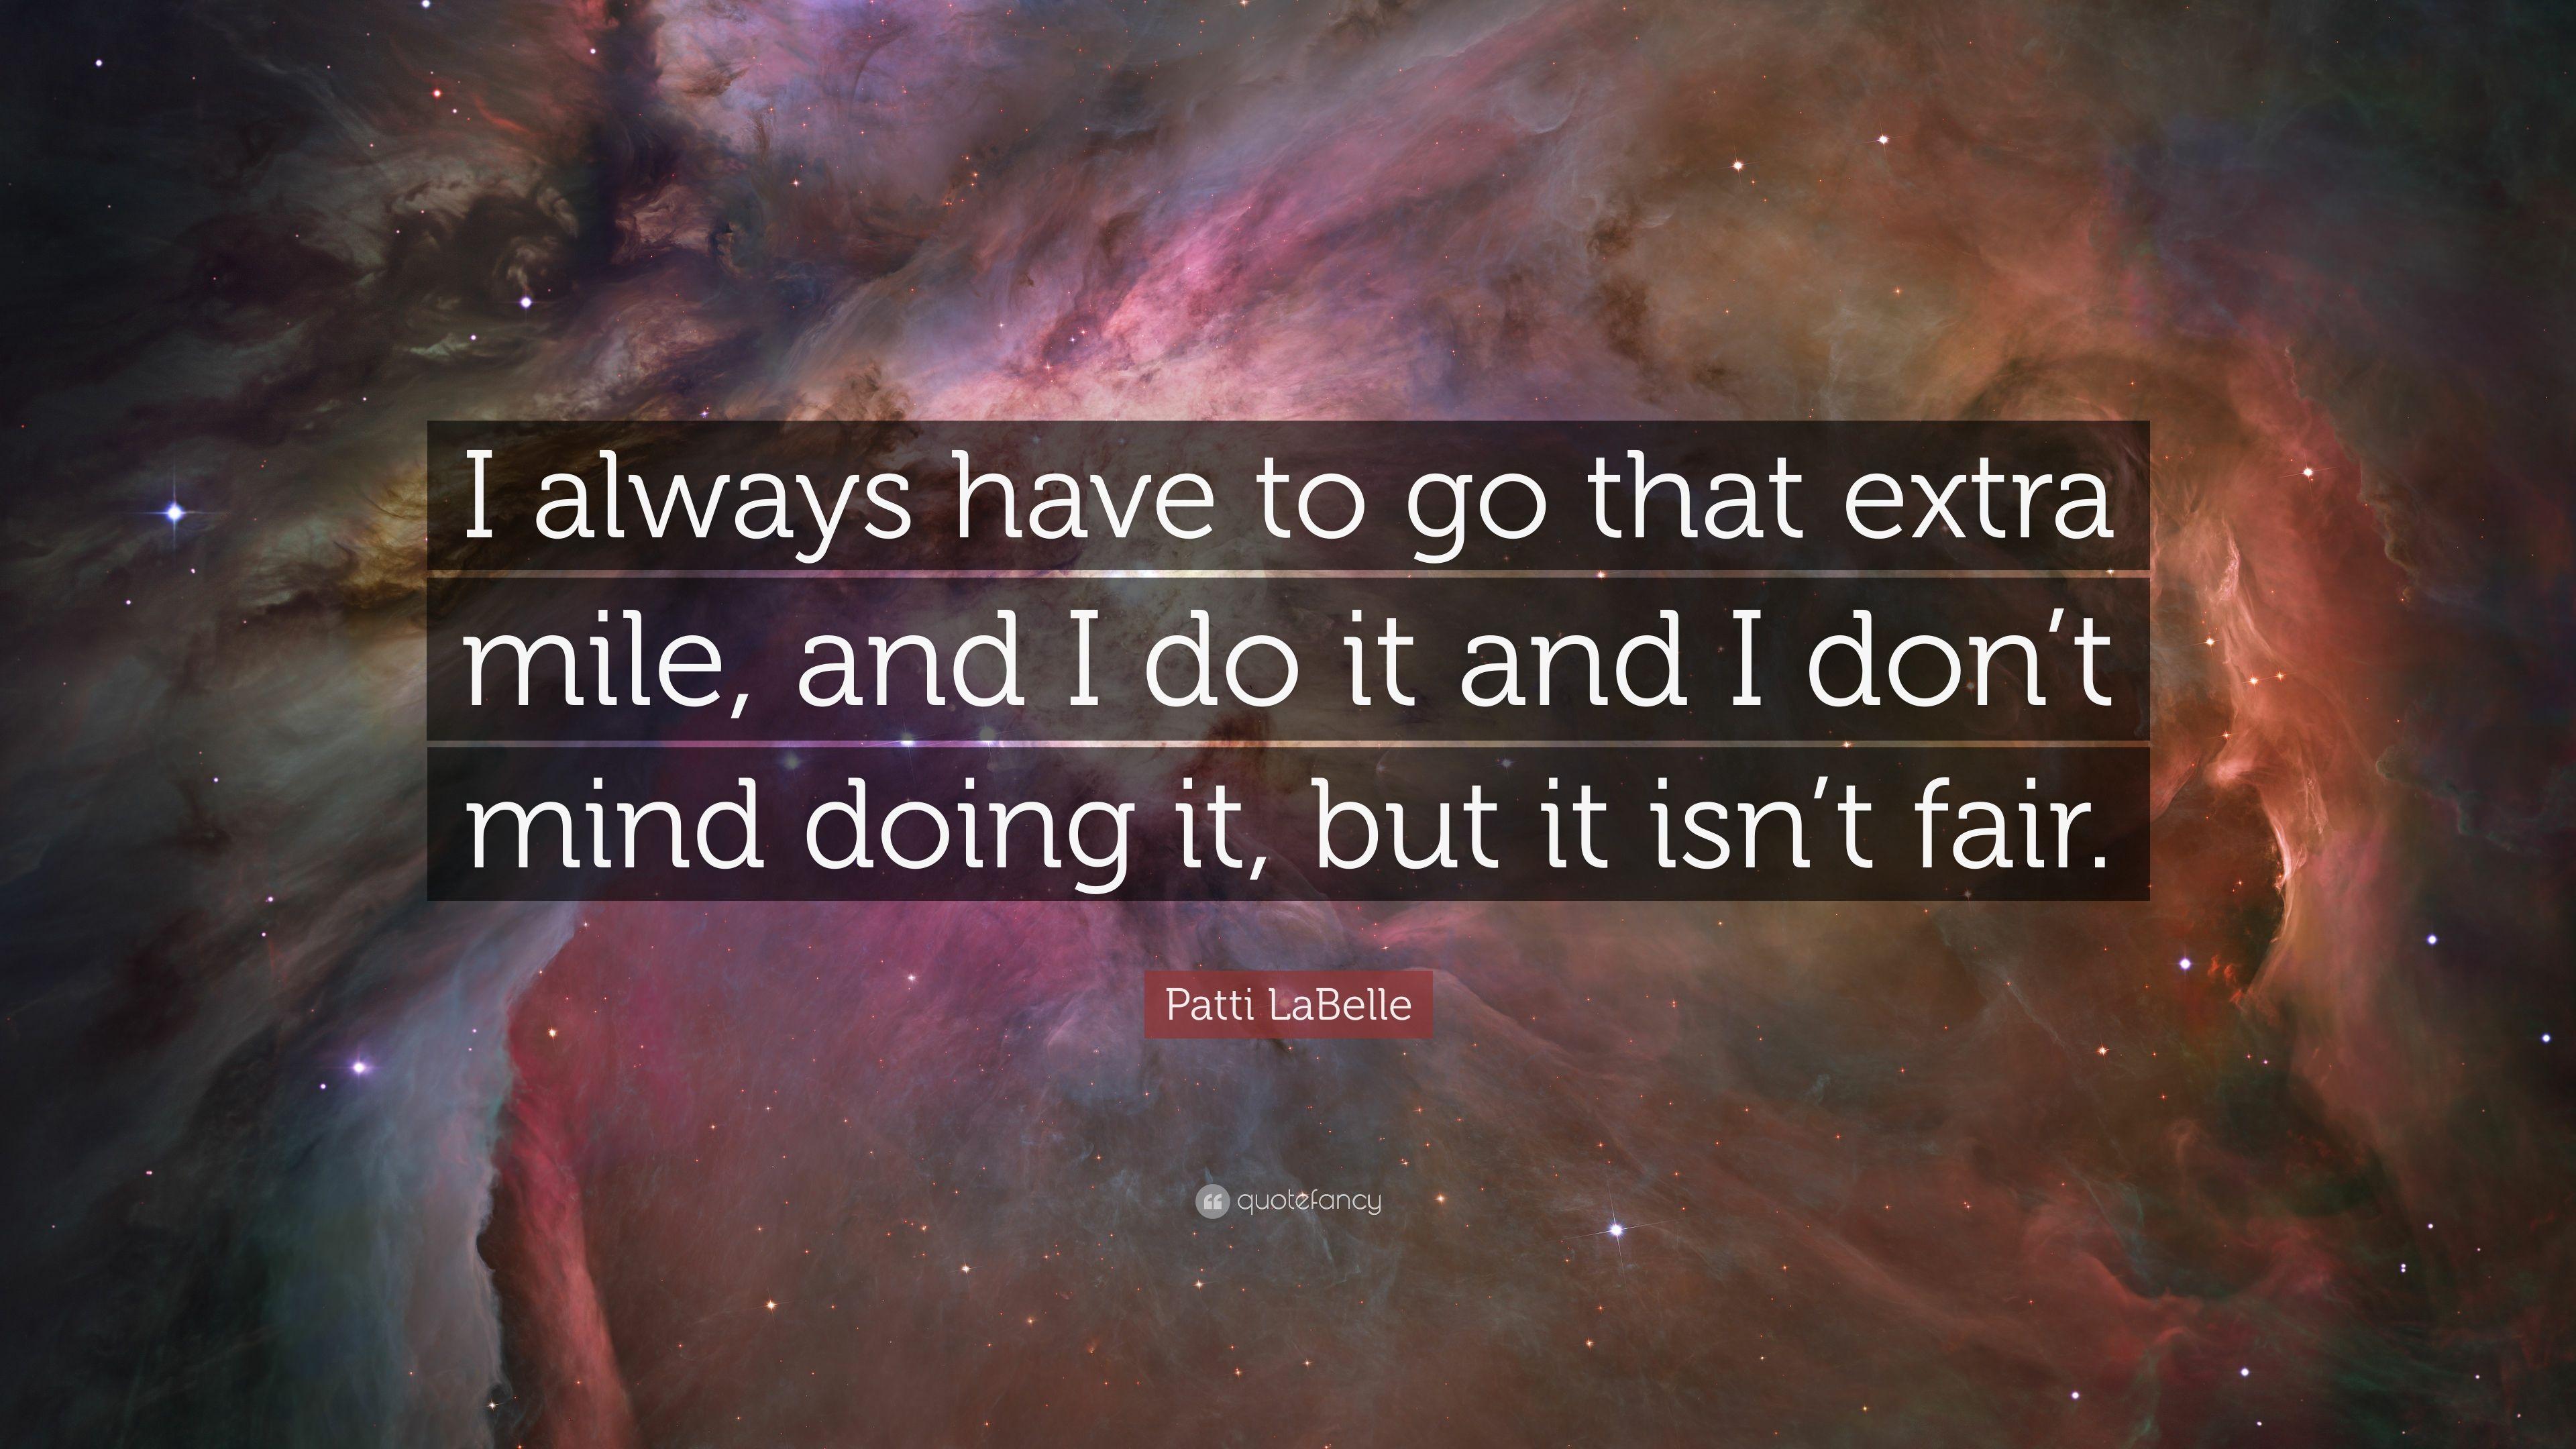 Patti LaBelle Quote: “I always have to go that extra mile, and I do